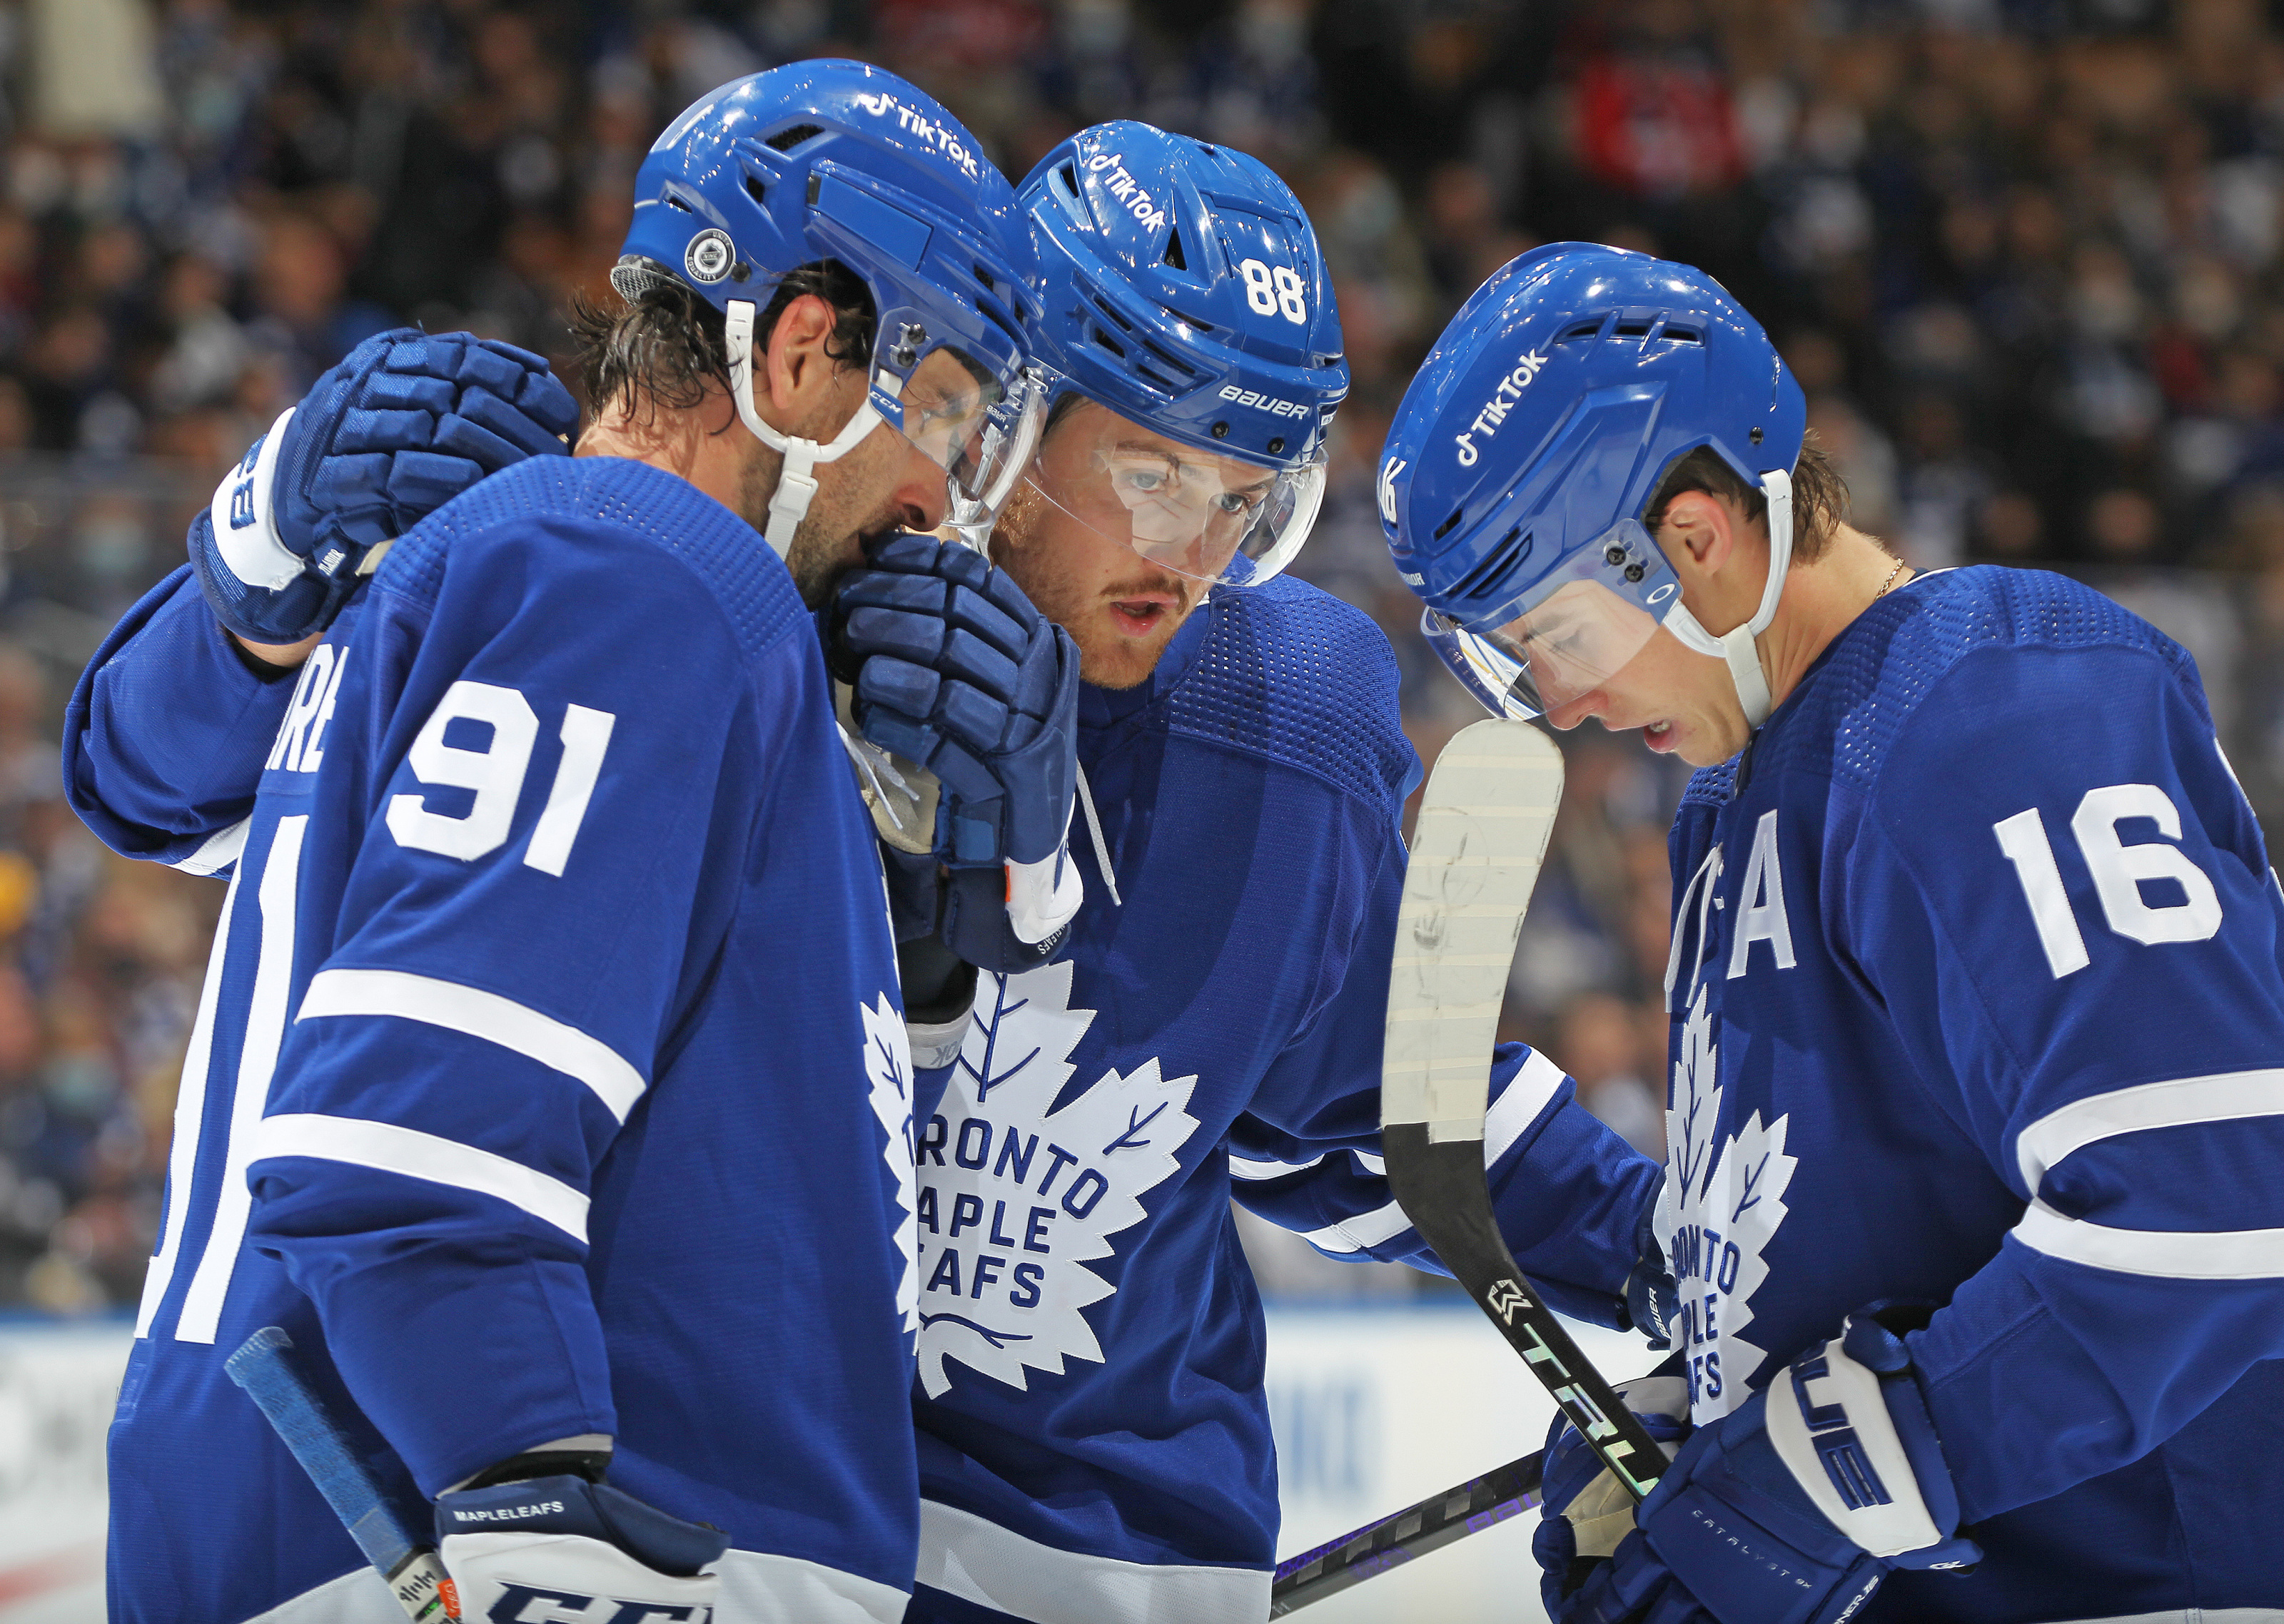 NHL: Maple Leafs haven't sold out a home game yet this season